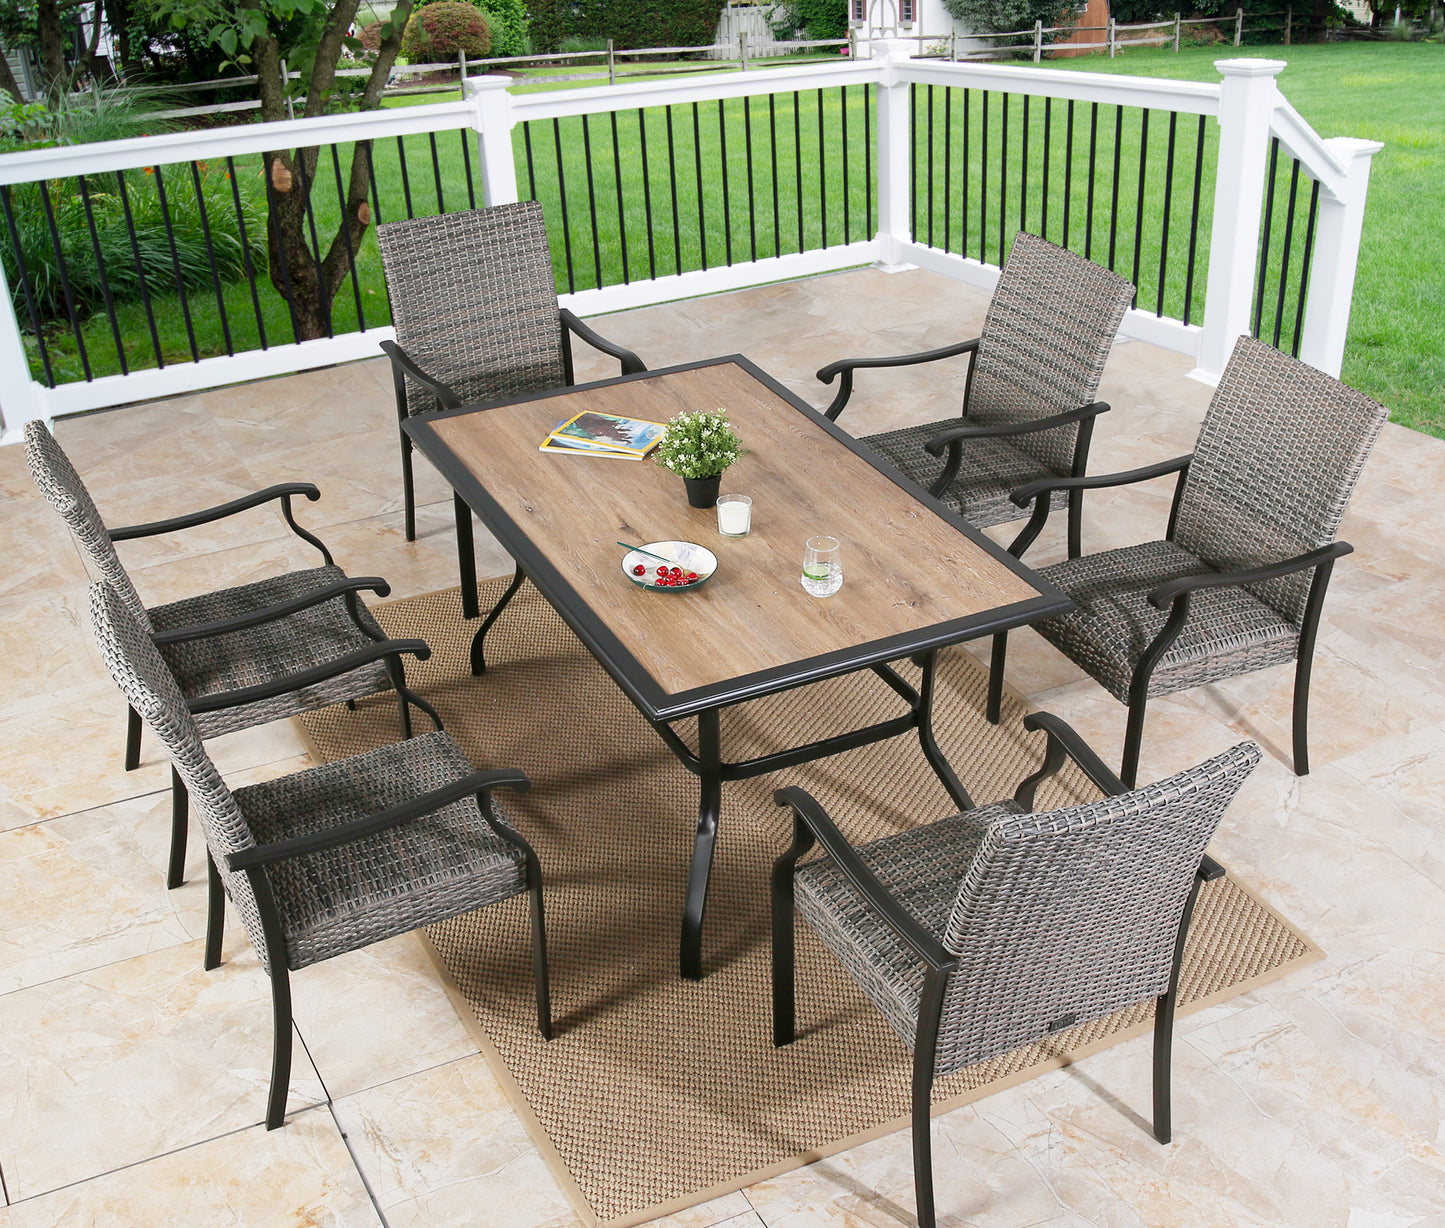 7 Piece Outdoor Dining Set Patio Wicker Furniture Dining Table Set with 6 Padded Dining Chairs and 1 Rectangular Garden Dining Table